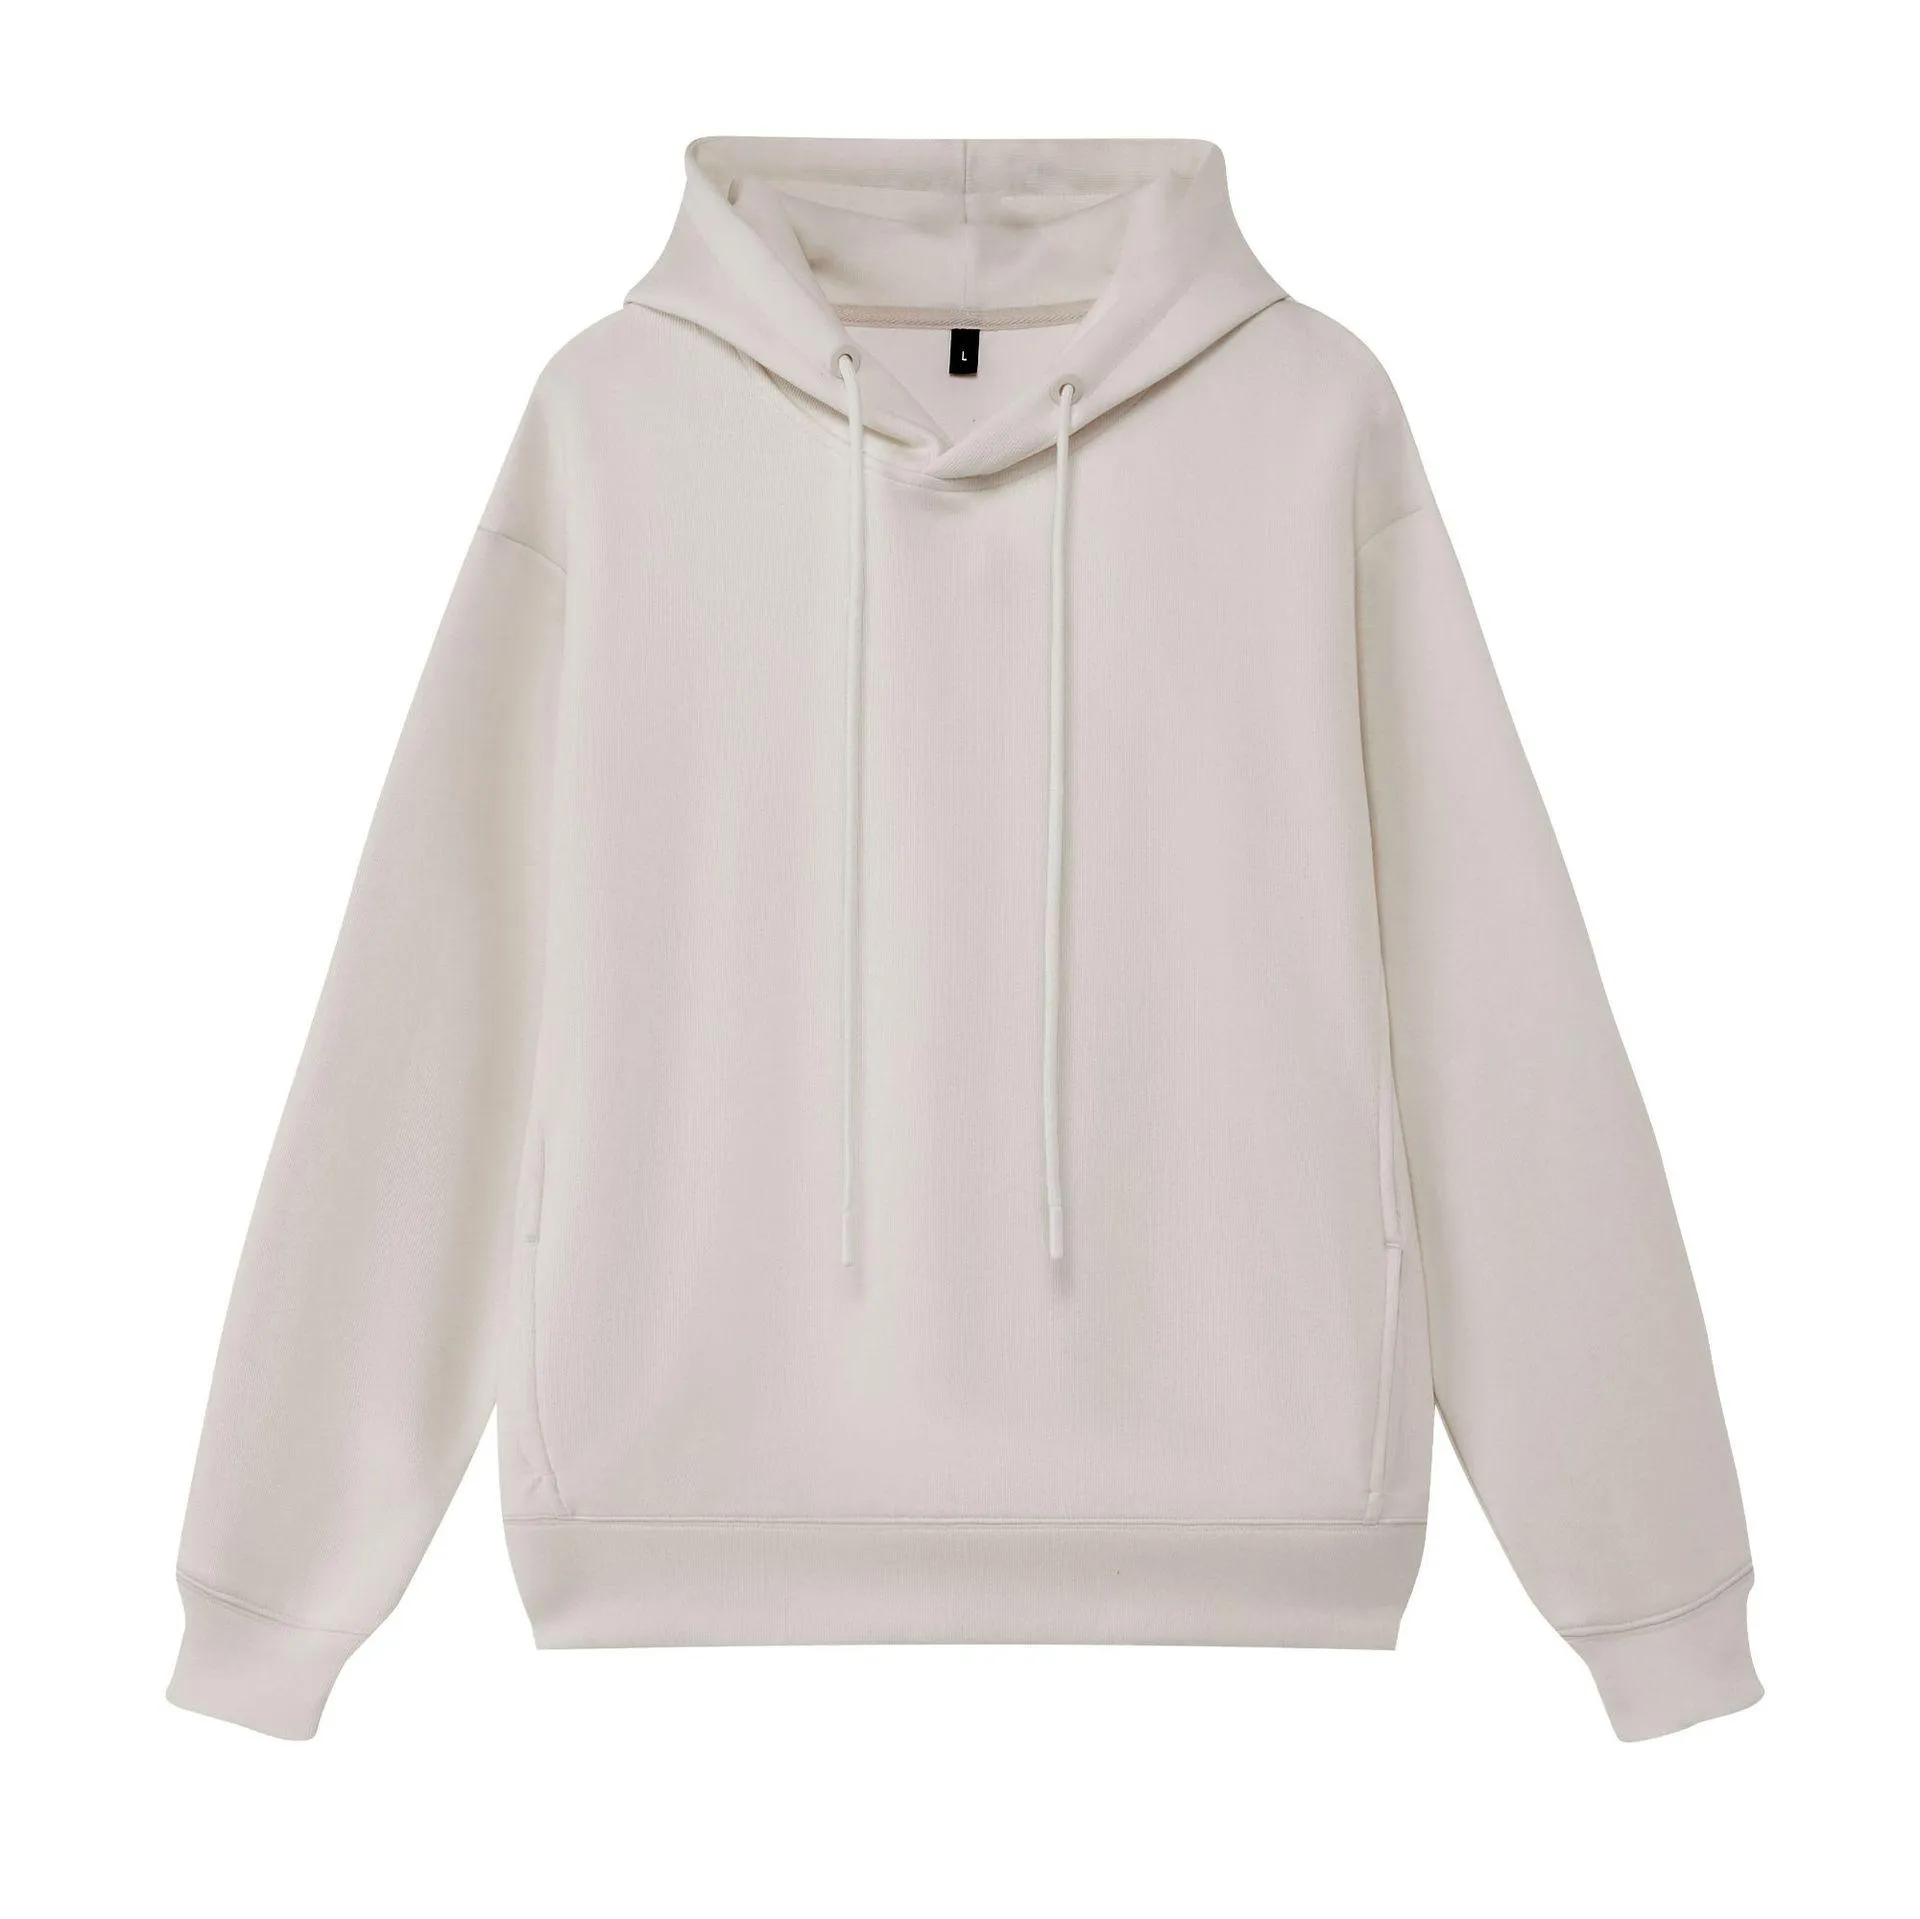 heavy baggy 380g off-shoulder hoodie for men autumn and winter long sleeved student pullover for women